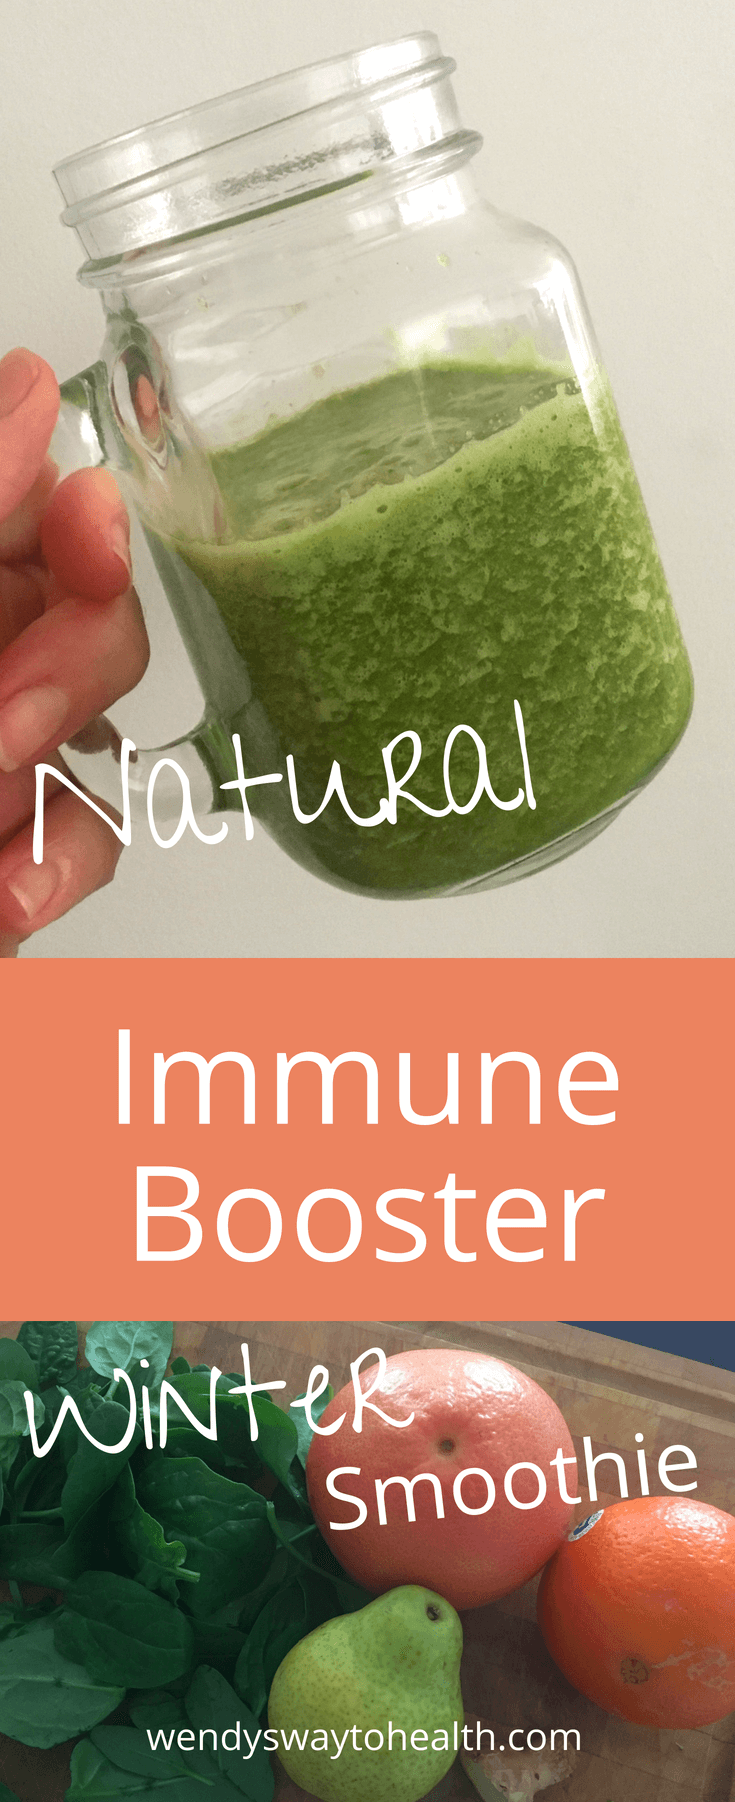 Try this immune boosting smoothie to keep Winter illnesses at bay